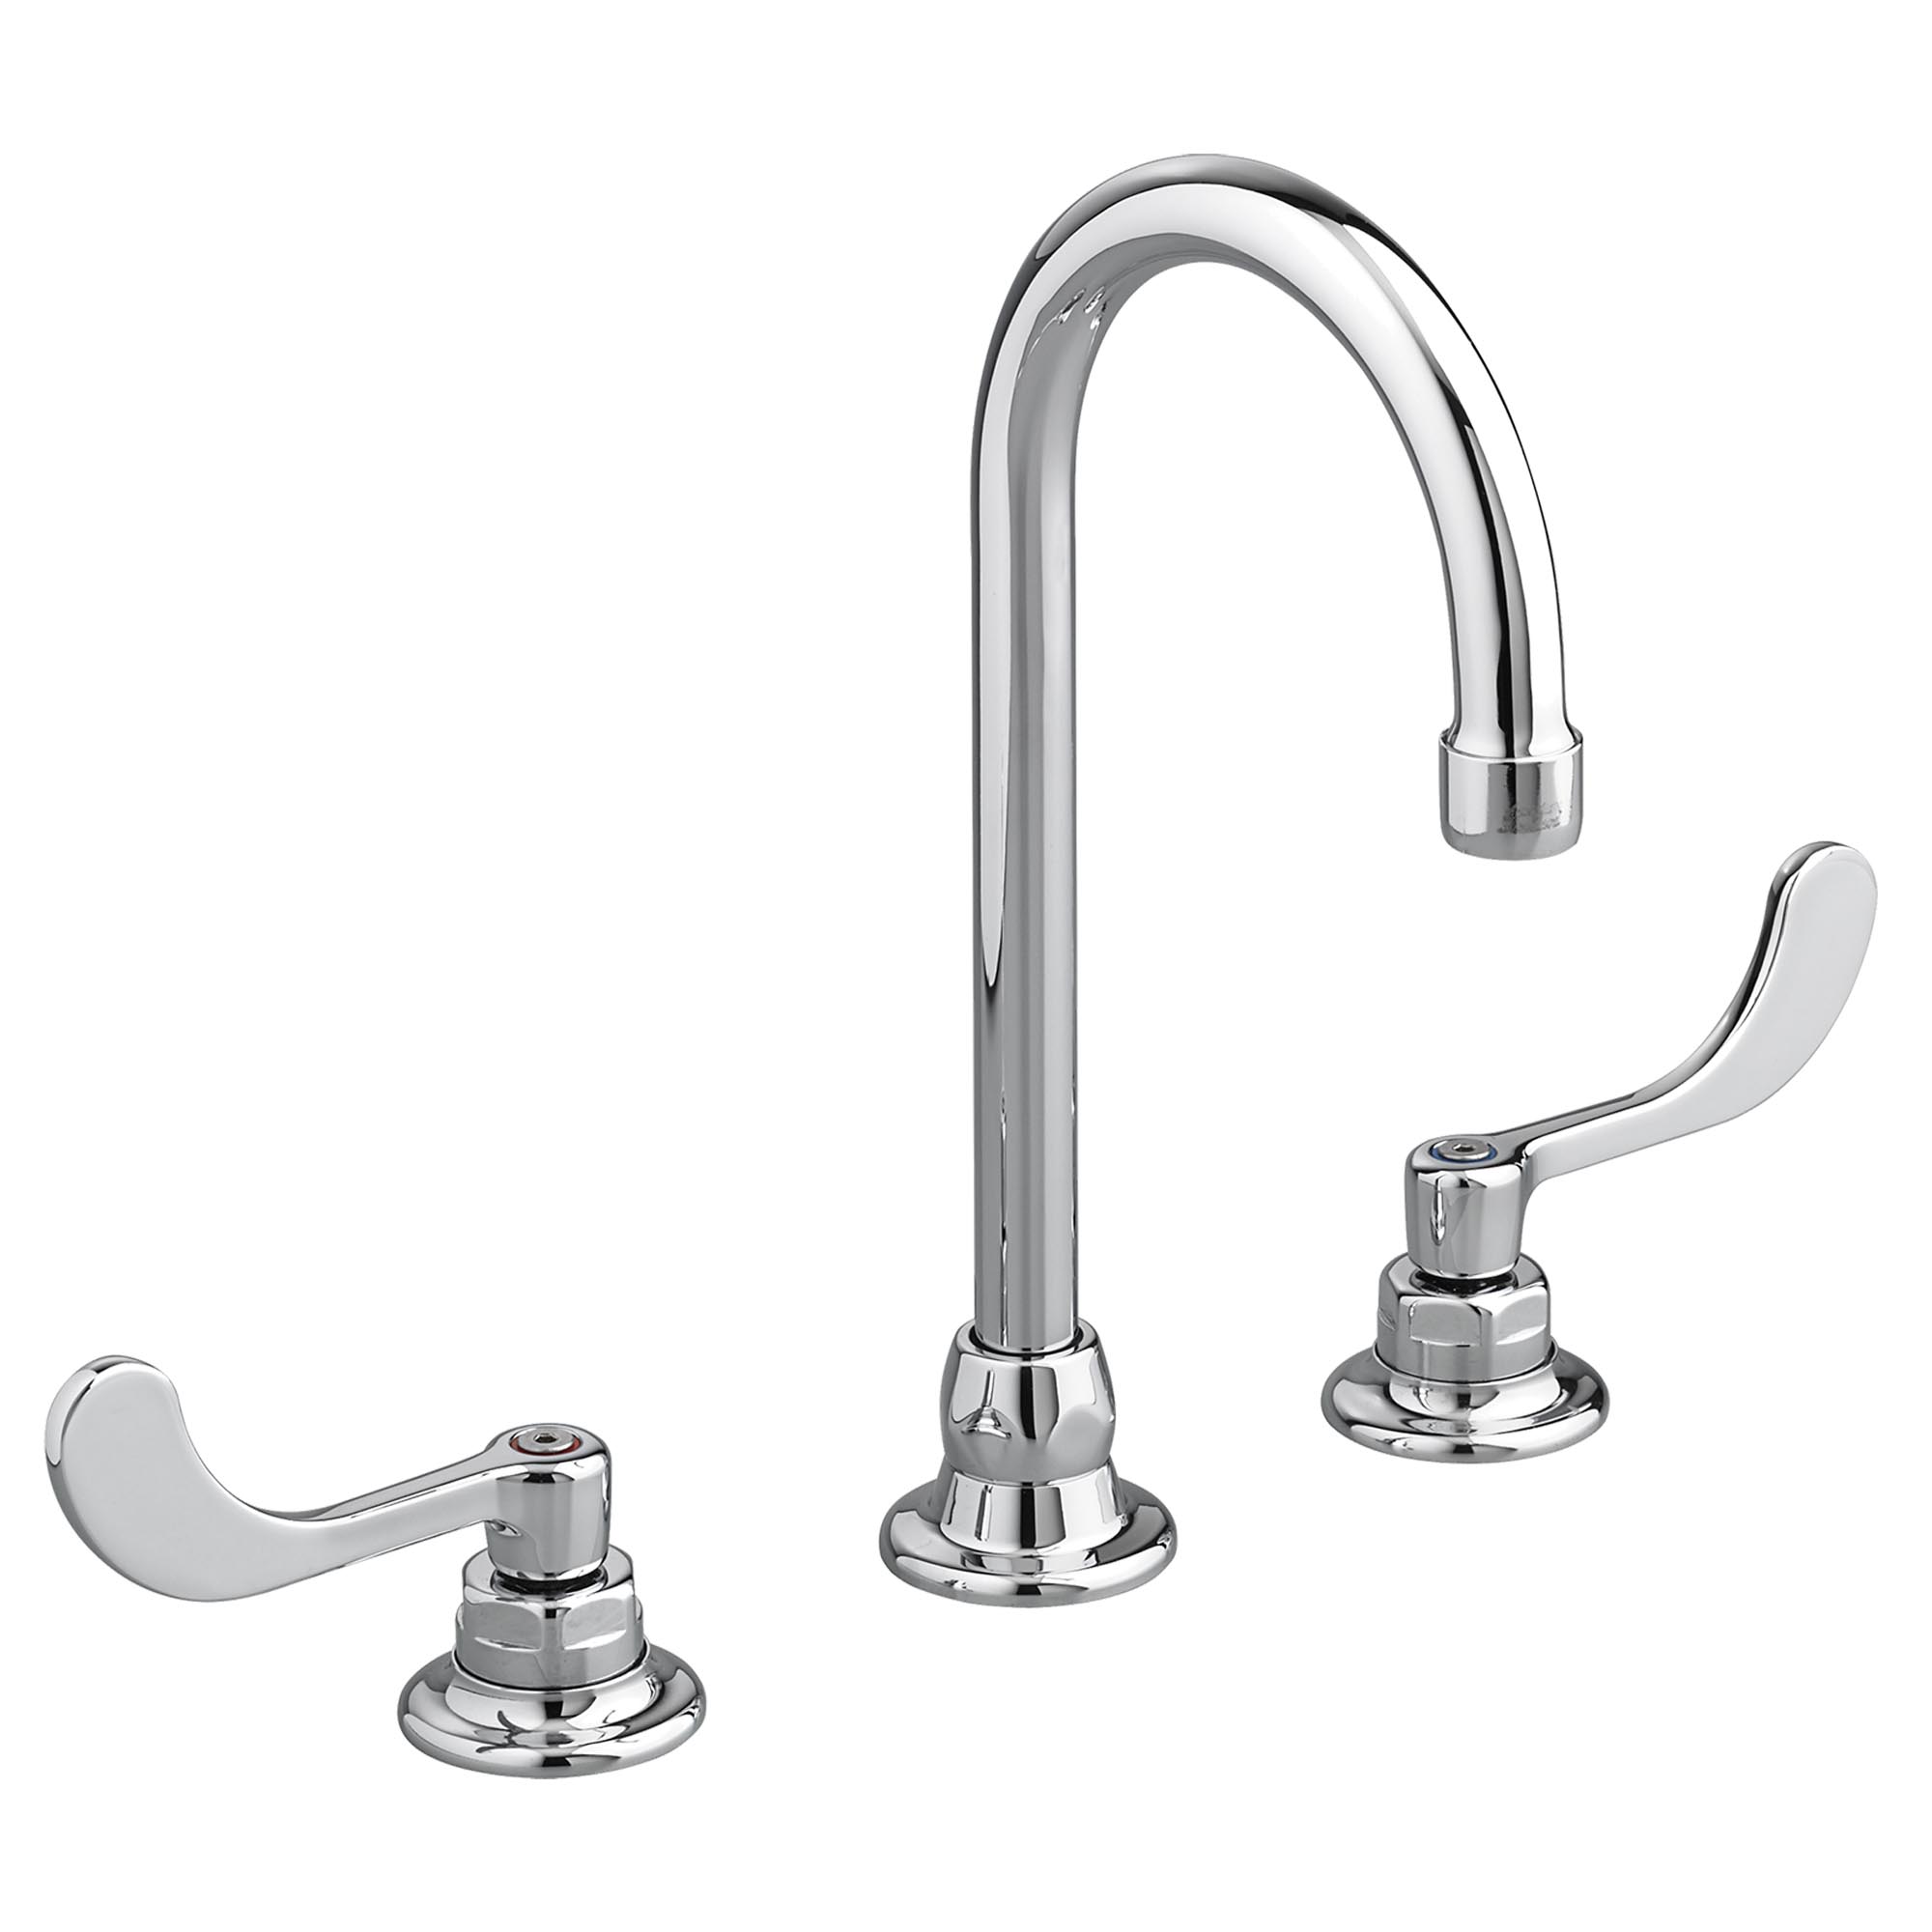 Monterrey™ 8-Inch Widespread Gooseneck Faucet With Wrist Blade Handles 1.5 gpm/5.7 Lpm With Limited Swivel